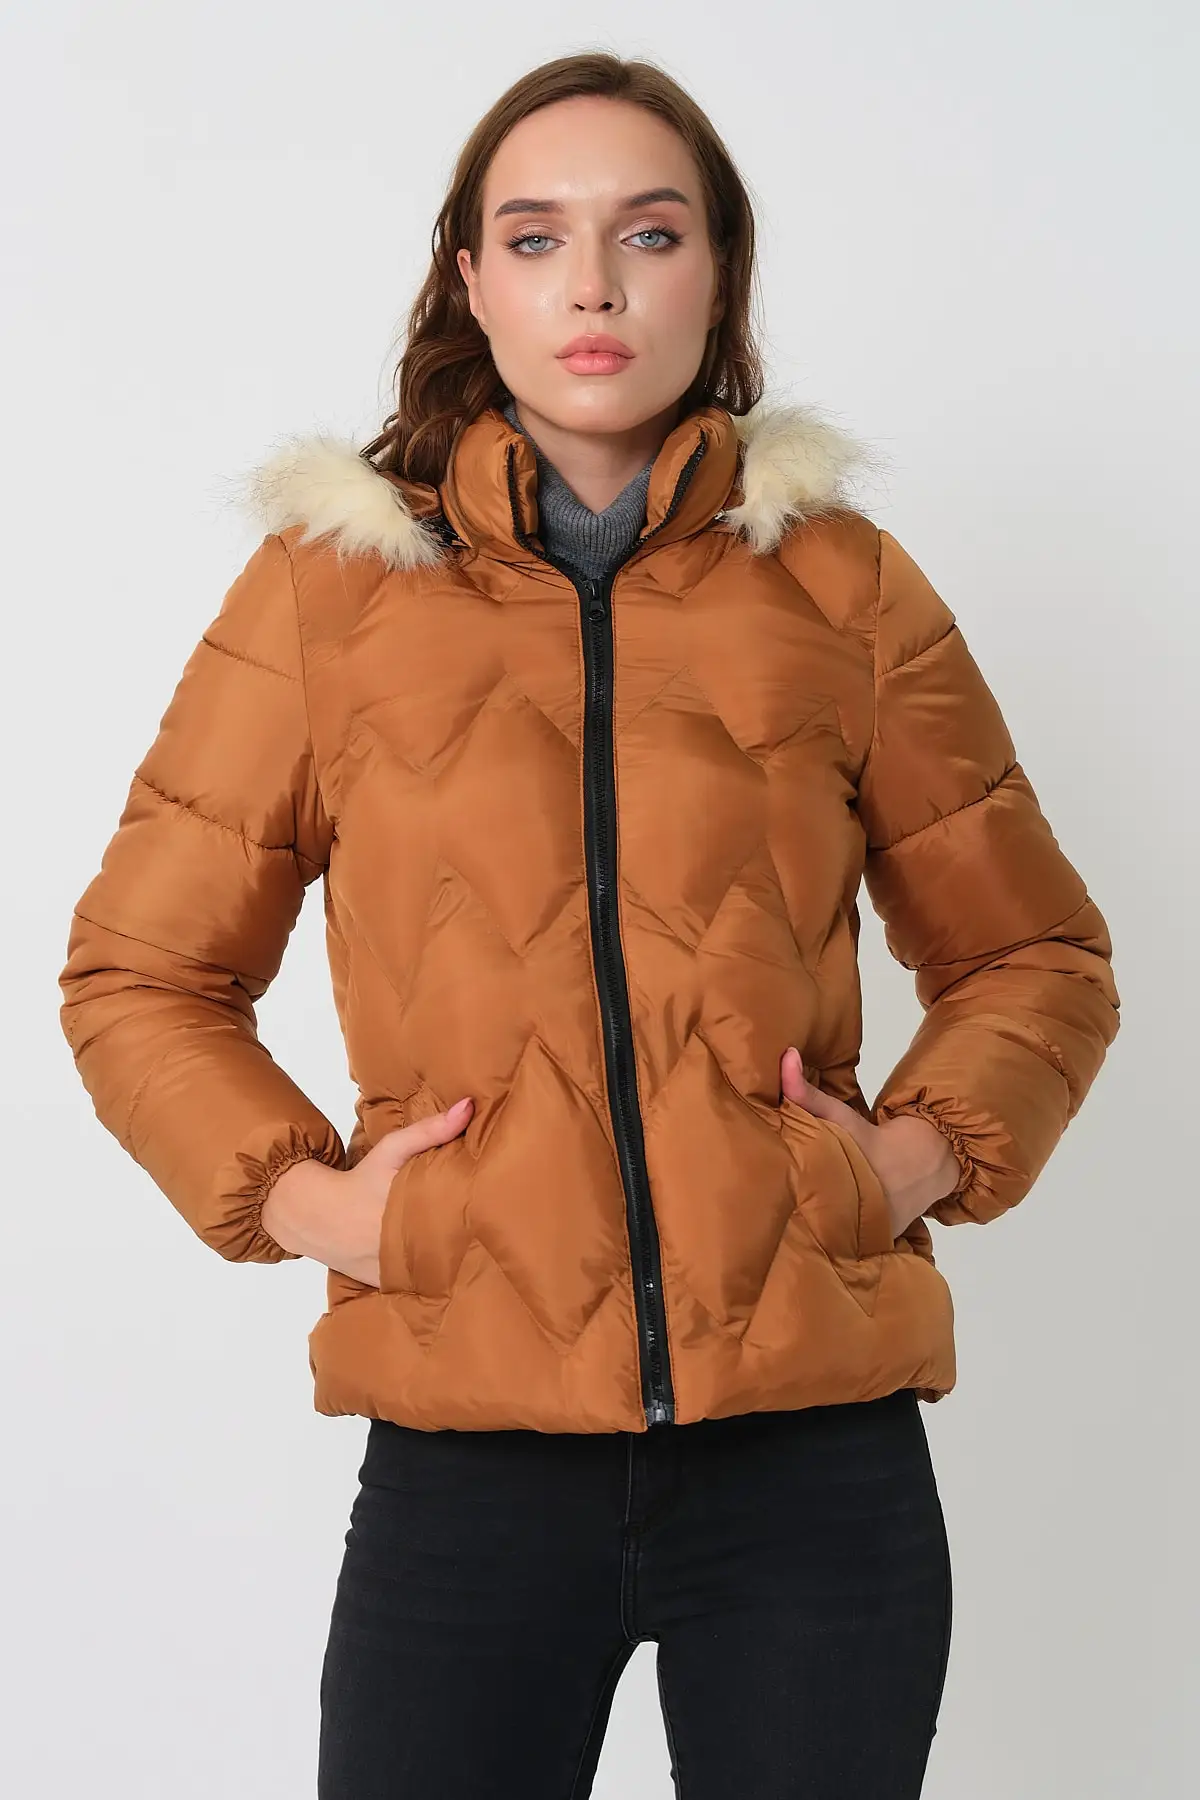 Women Tan Fur Hooded Pattern Inflatable Coat Personalized Design